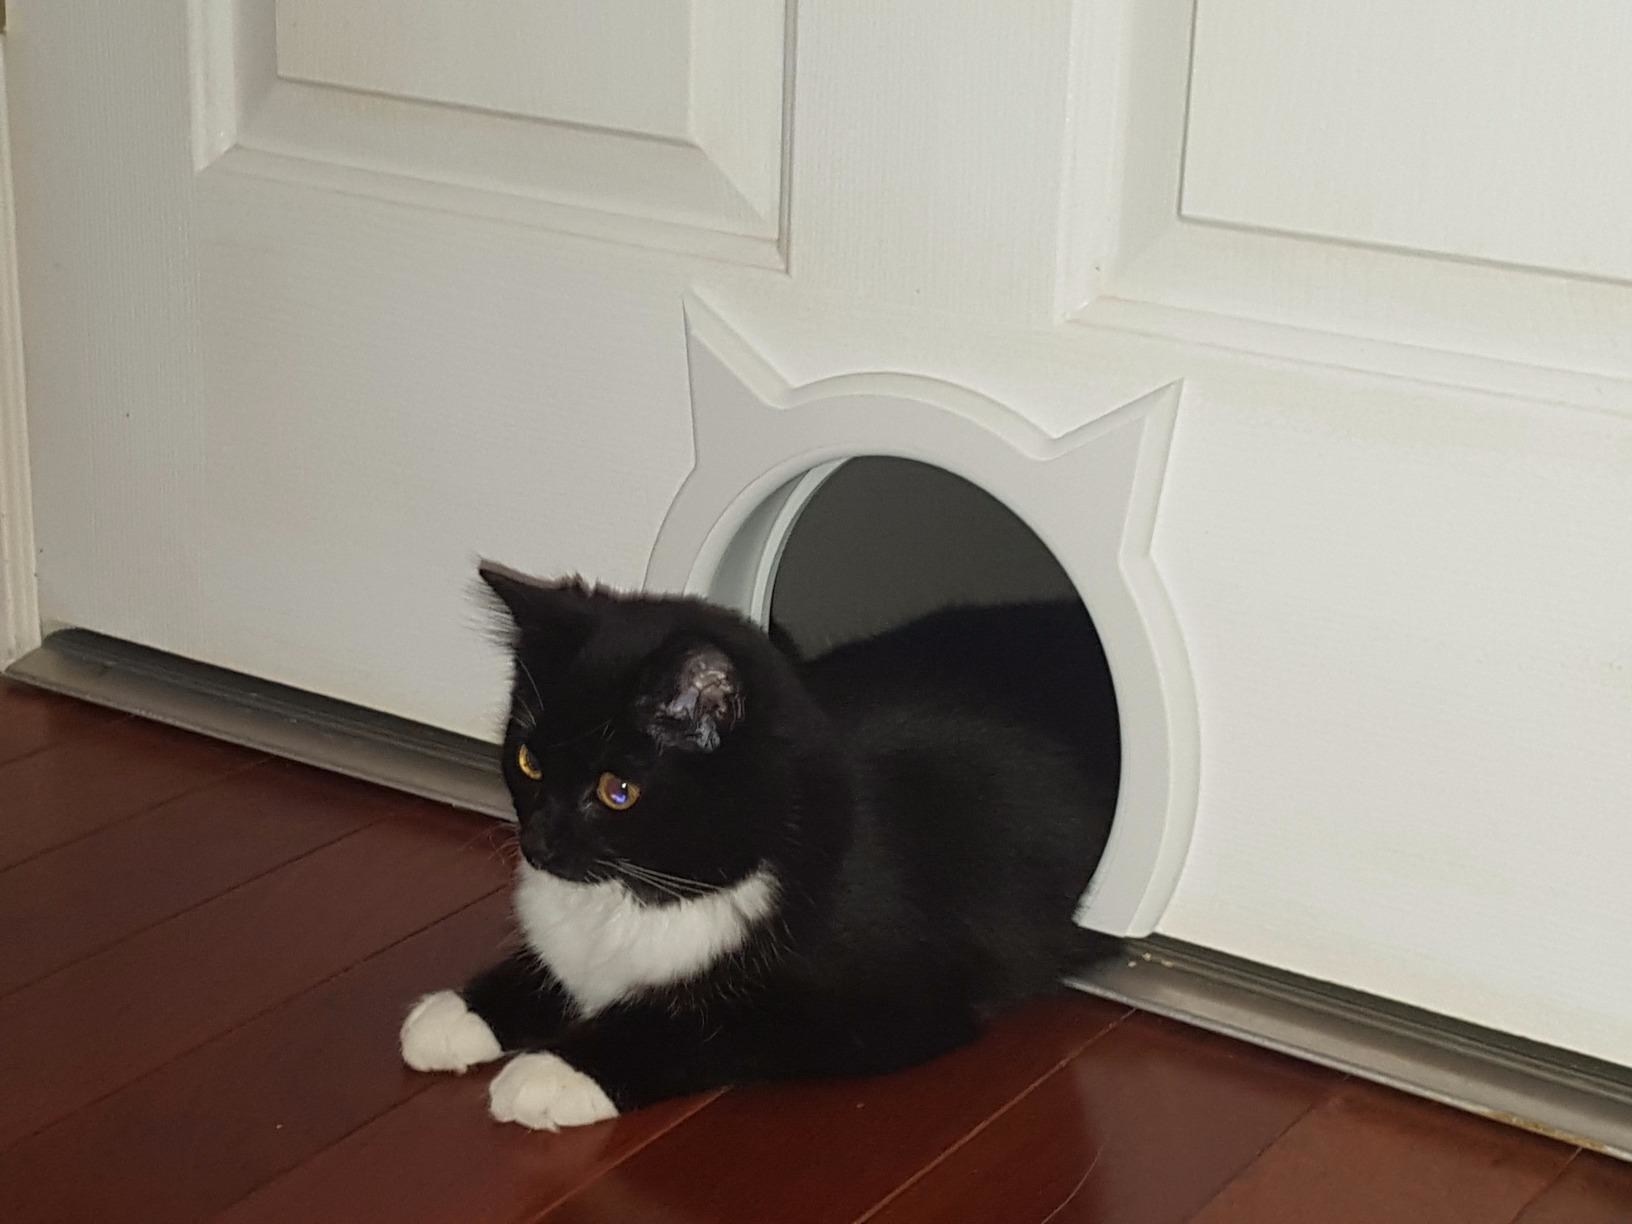 The cat passageway, which is round and has a cat ears design, installed in the bottom of a door that has had an area cut away